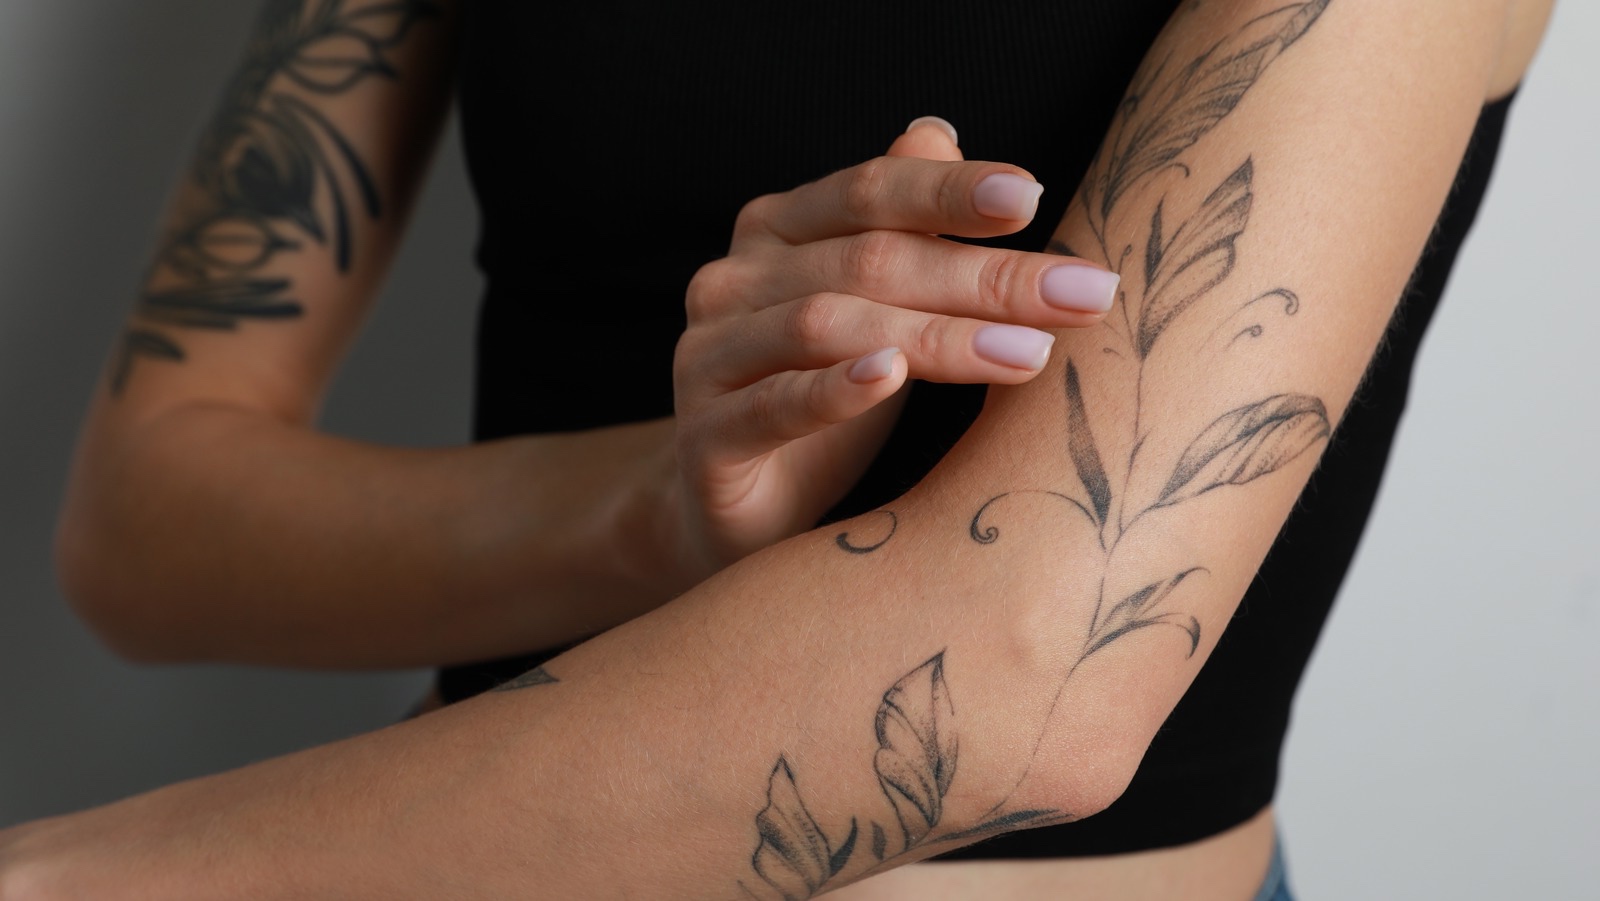 Is it better to get a tattoo on your calf or your forearm? - Quora